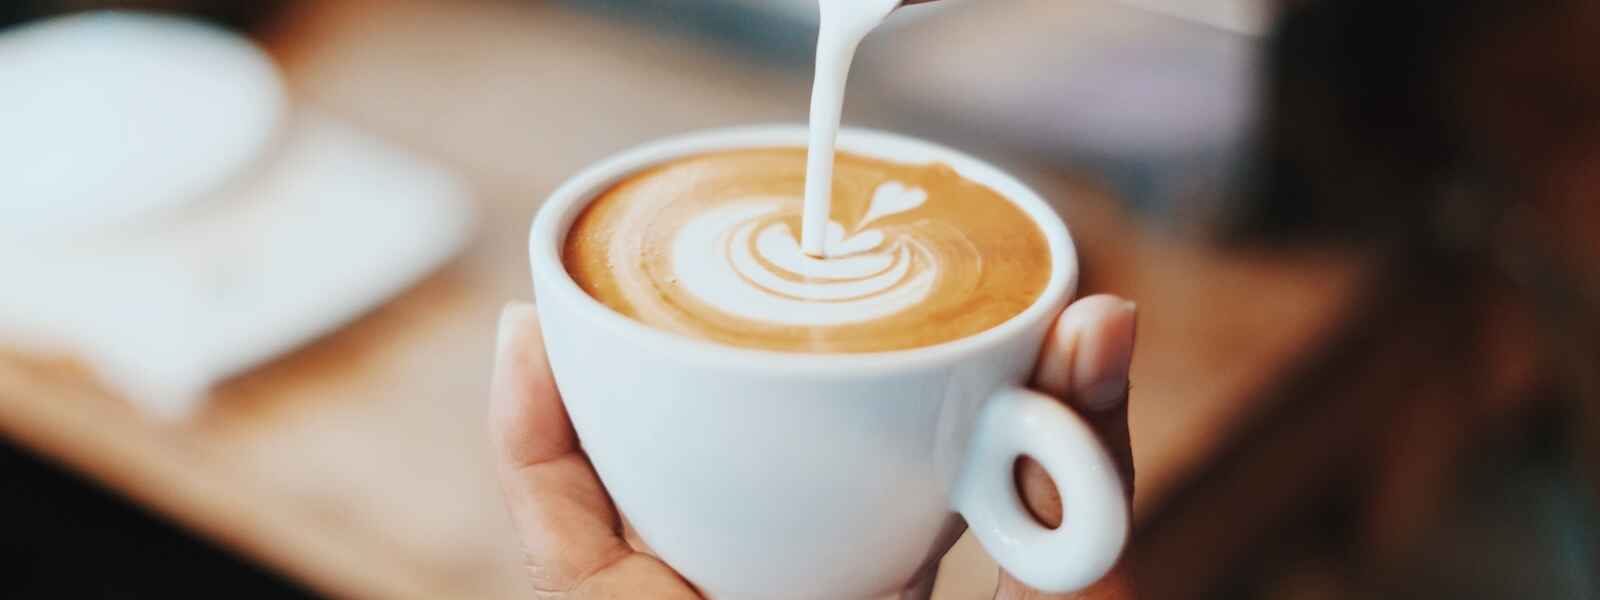 a hand holds a coffee cup while pouring in milk for latte art